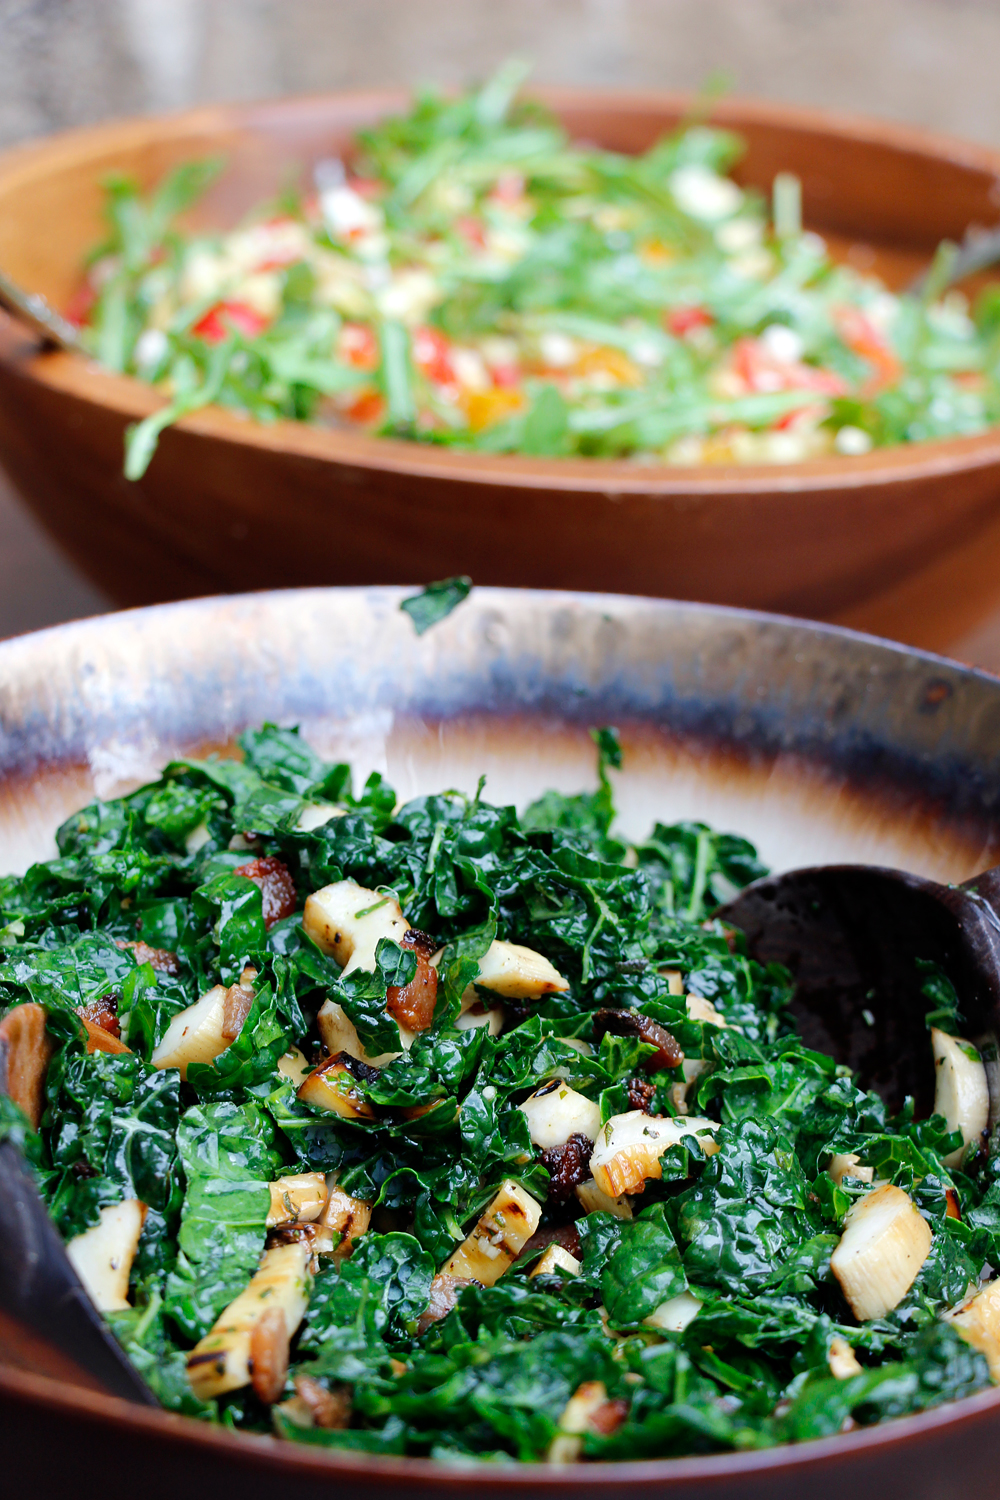 Grilled King Trumpet Mushroom, Kale, and Bacon Salad with Lemon-Herb Vinaigrette. Photo: Wendy Goodfriend